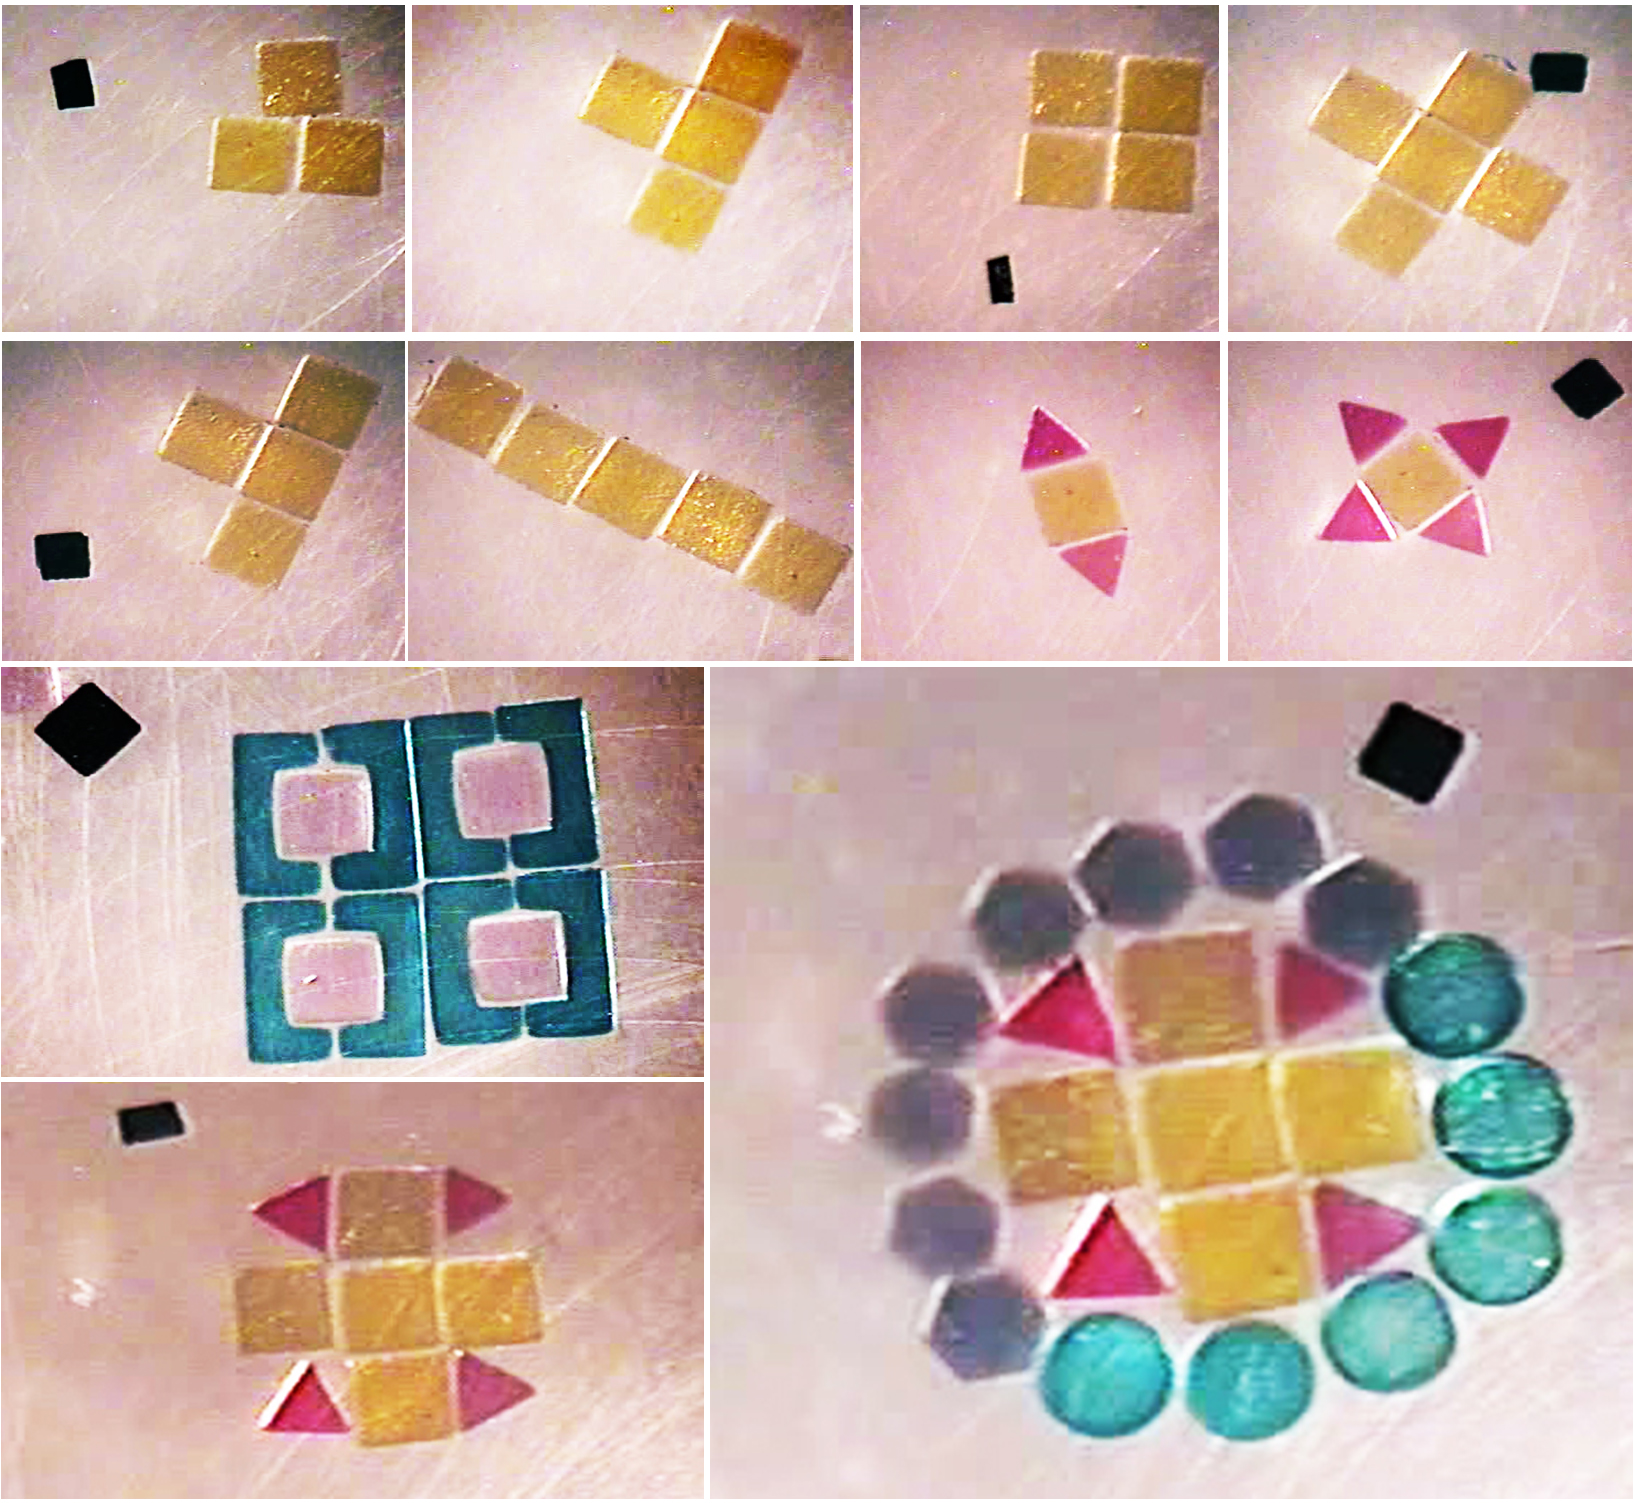 Two-dimensional micro-robotic coding of material composition